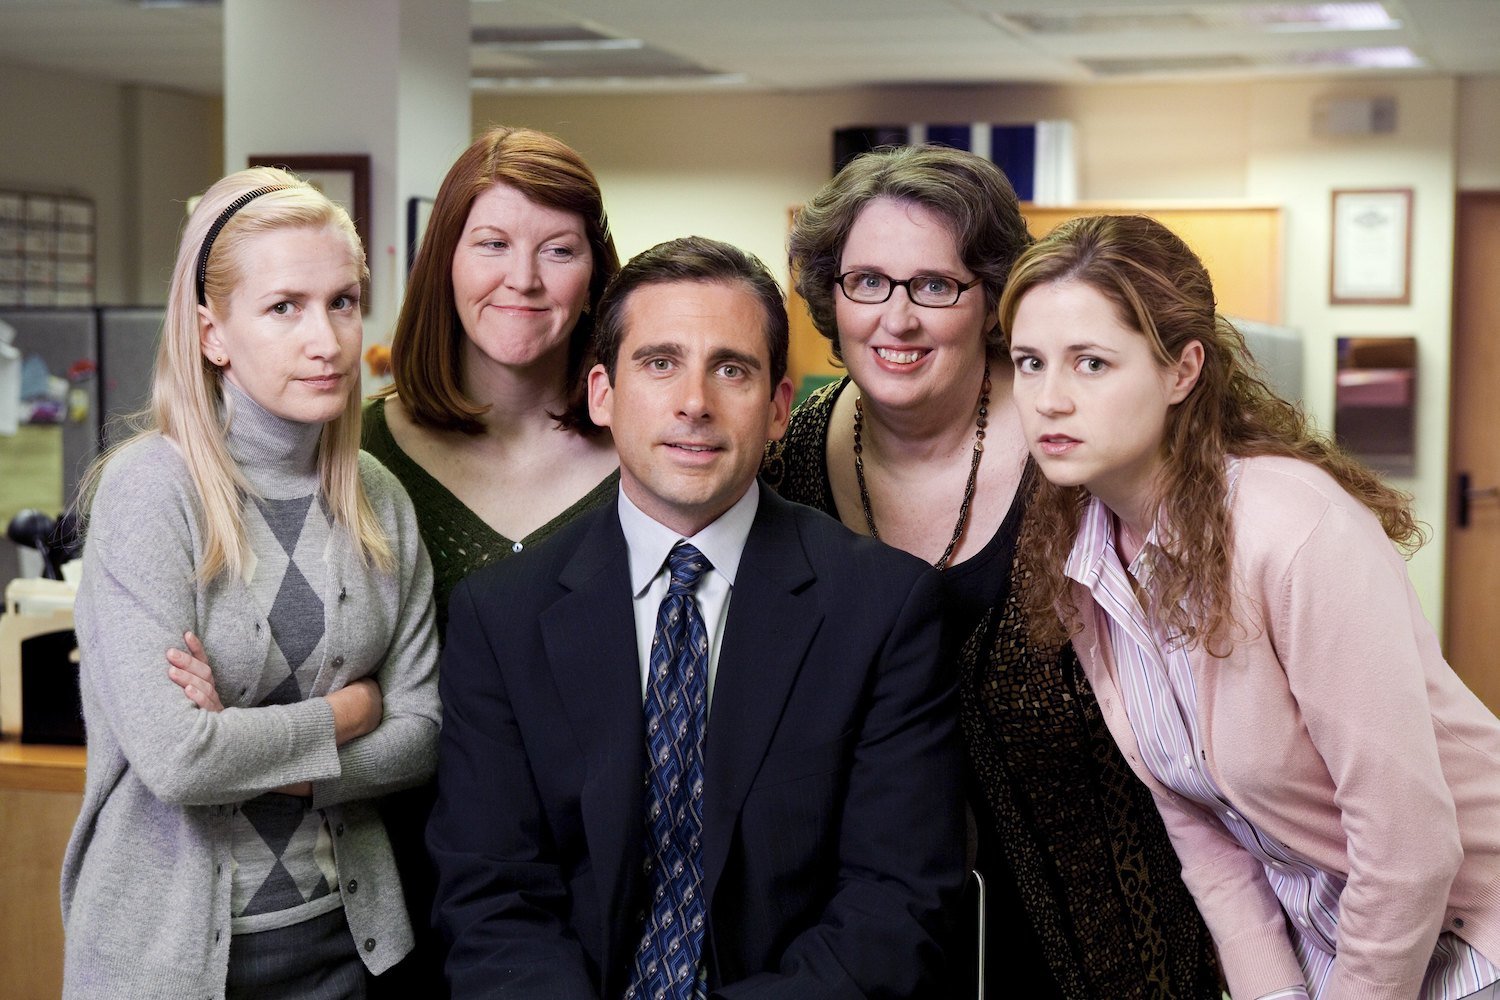 The Office cast in character: Angela Kinsey as Angela Martin, Kate Flannery as Meredith Palmer, Steve Carell as Michael Scott, Phyllis Smith as Phyllis Lapin, and Jenna Fischer as Pam Beesly 